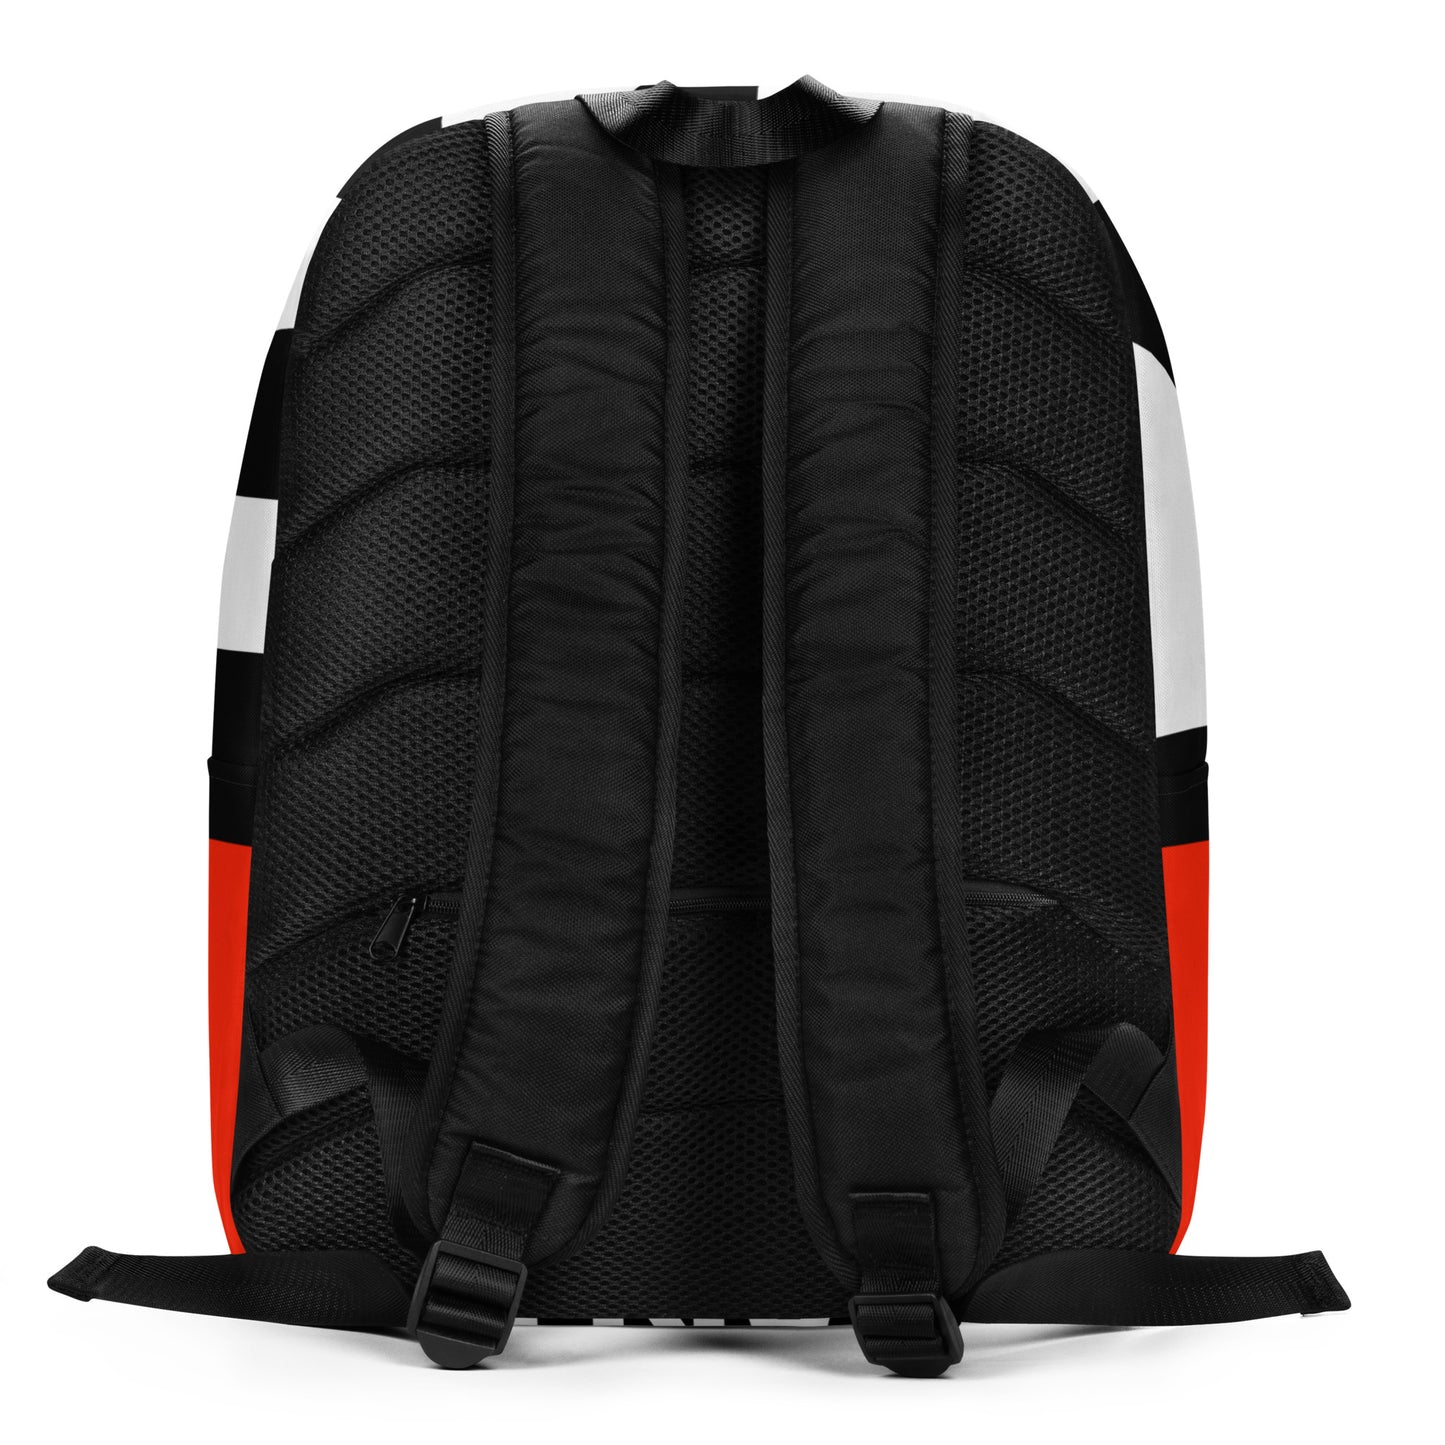 Beatmaker Laptop / Drum Machine and Accessories Backpack - Black